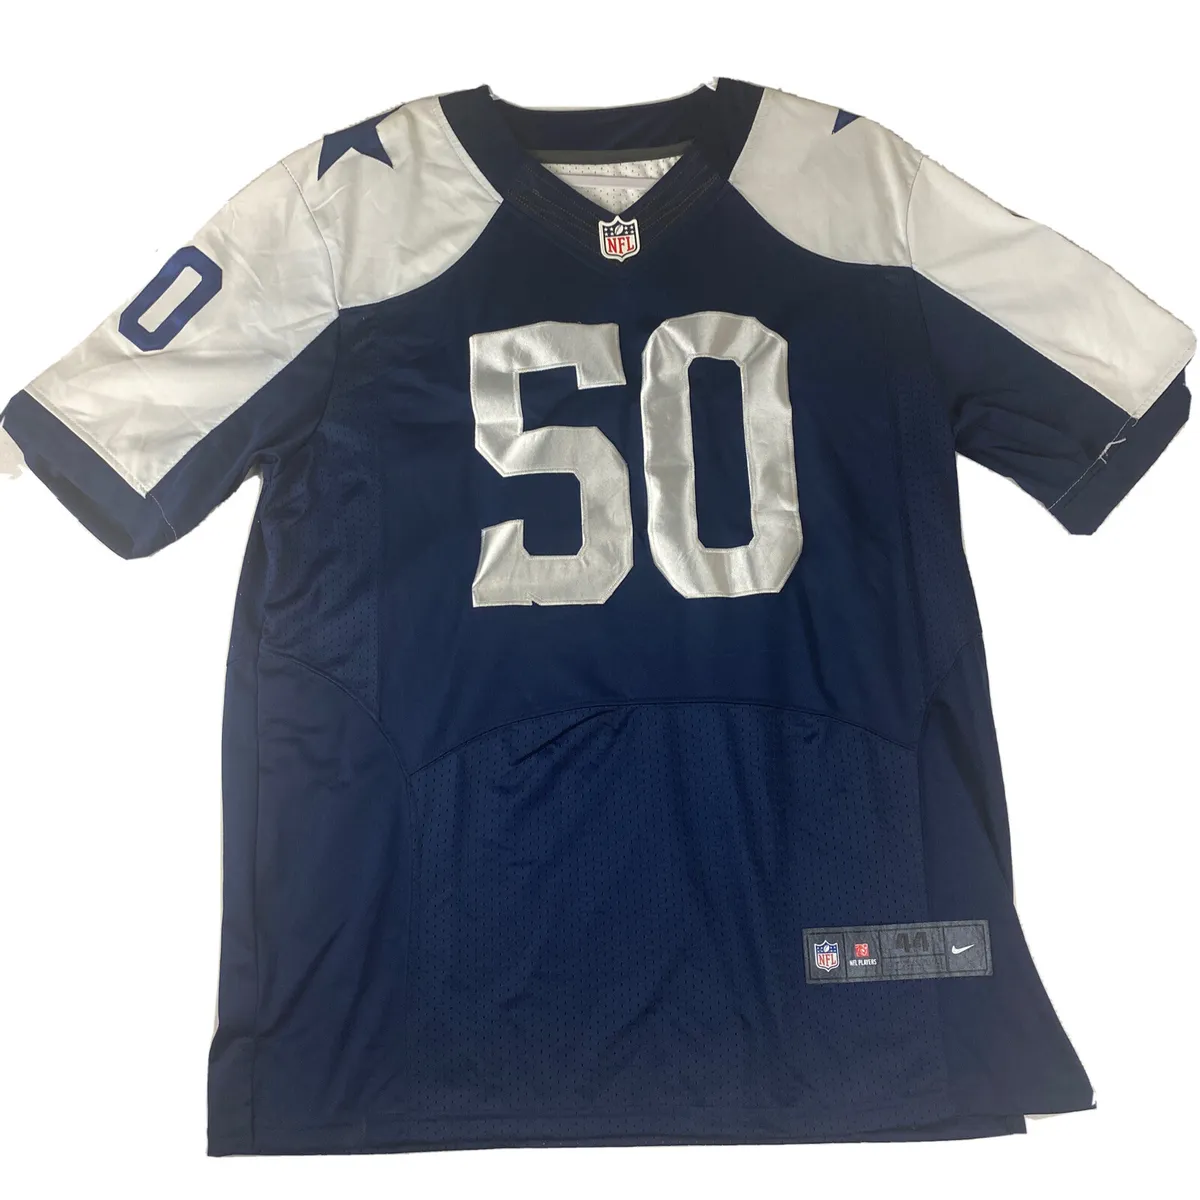 blue and white nfl jersey